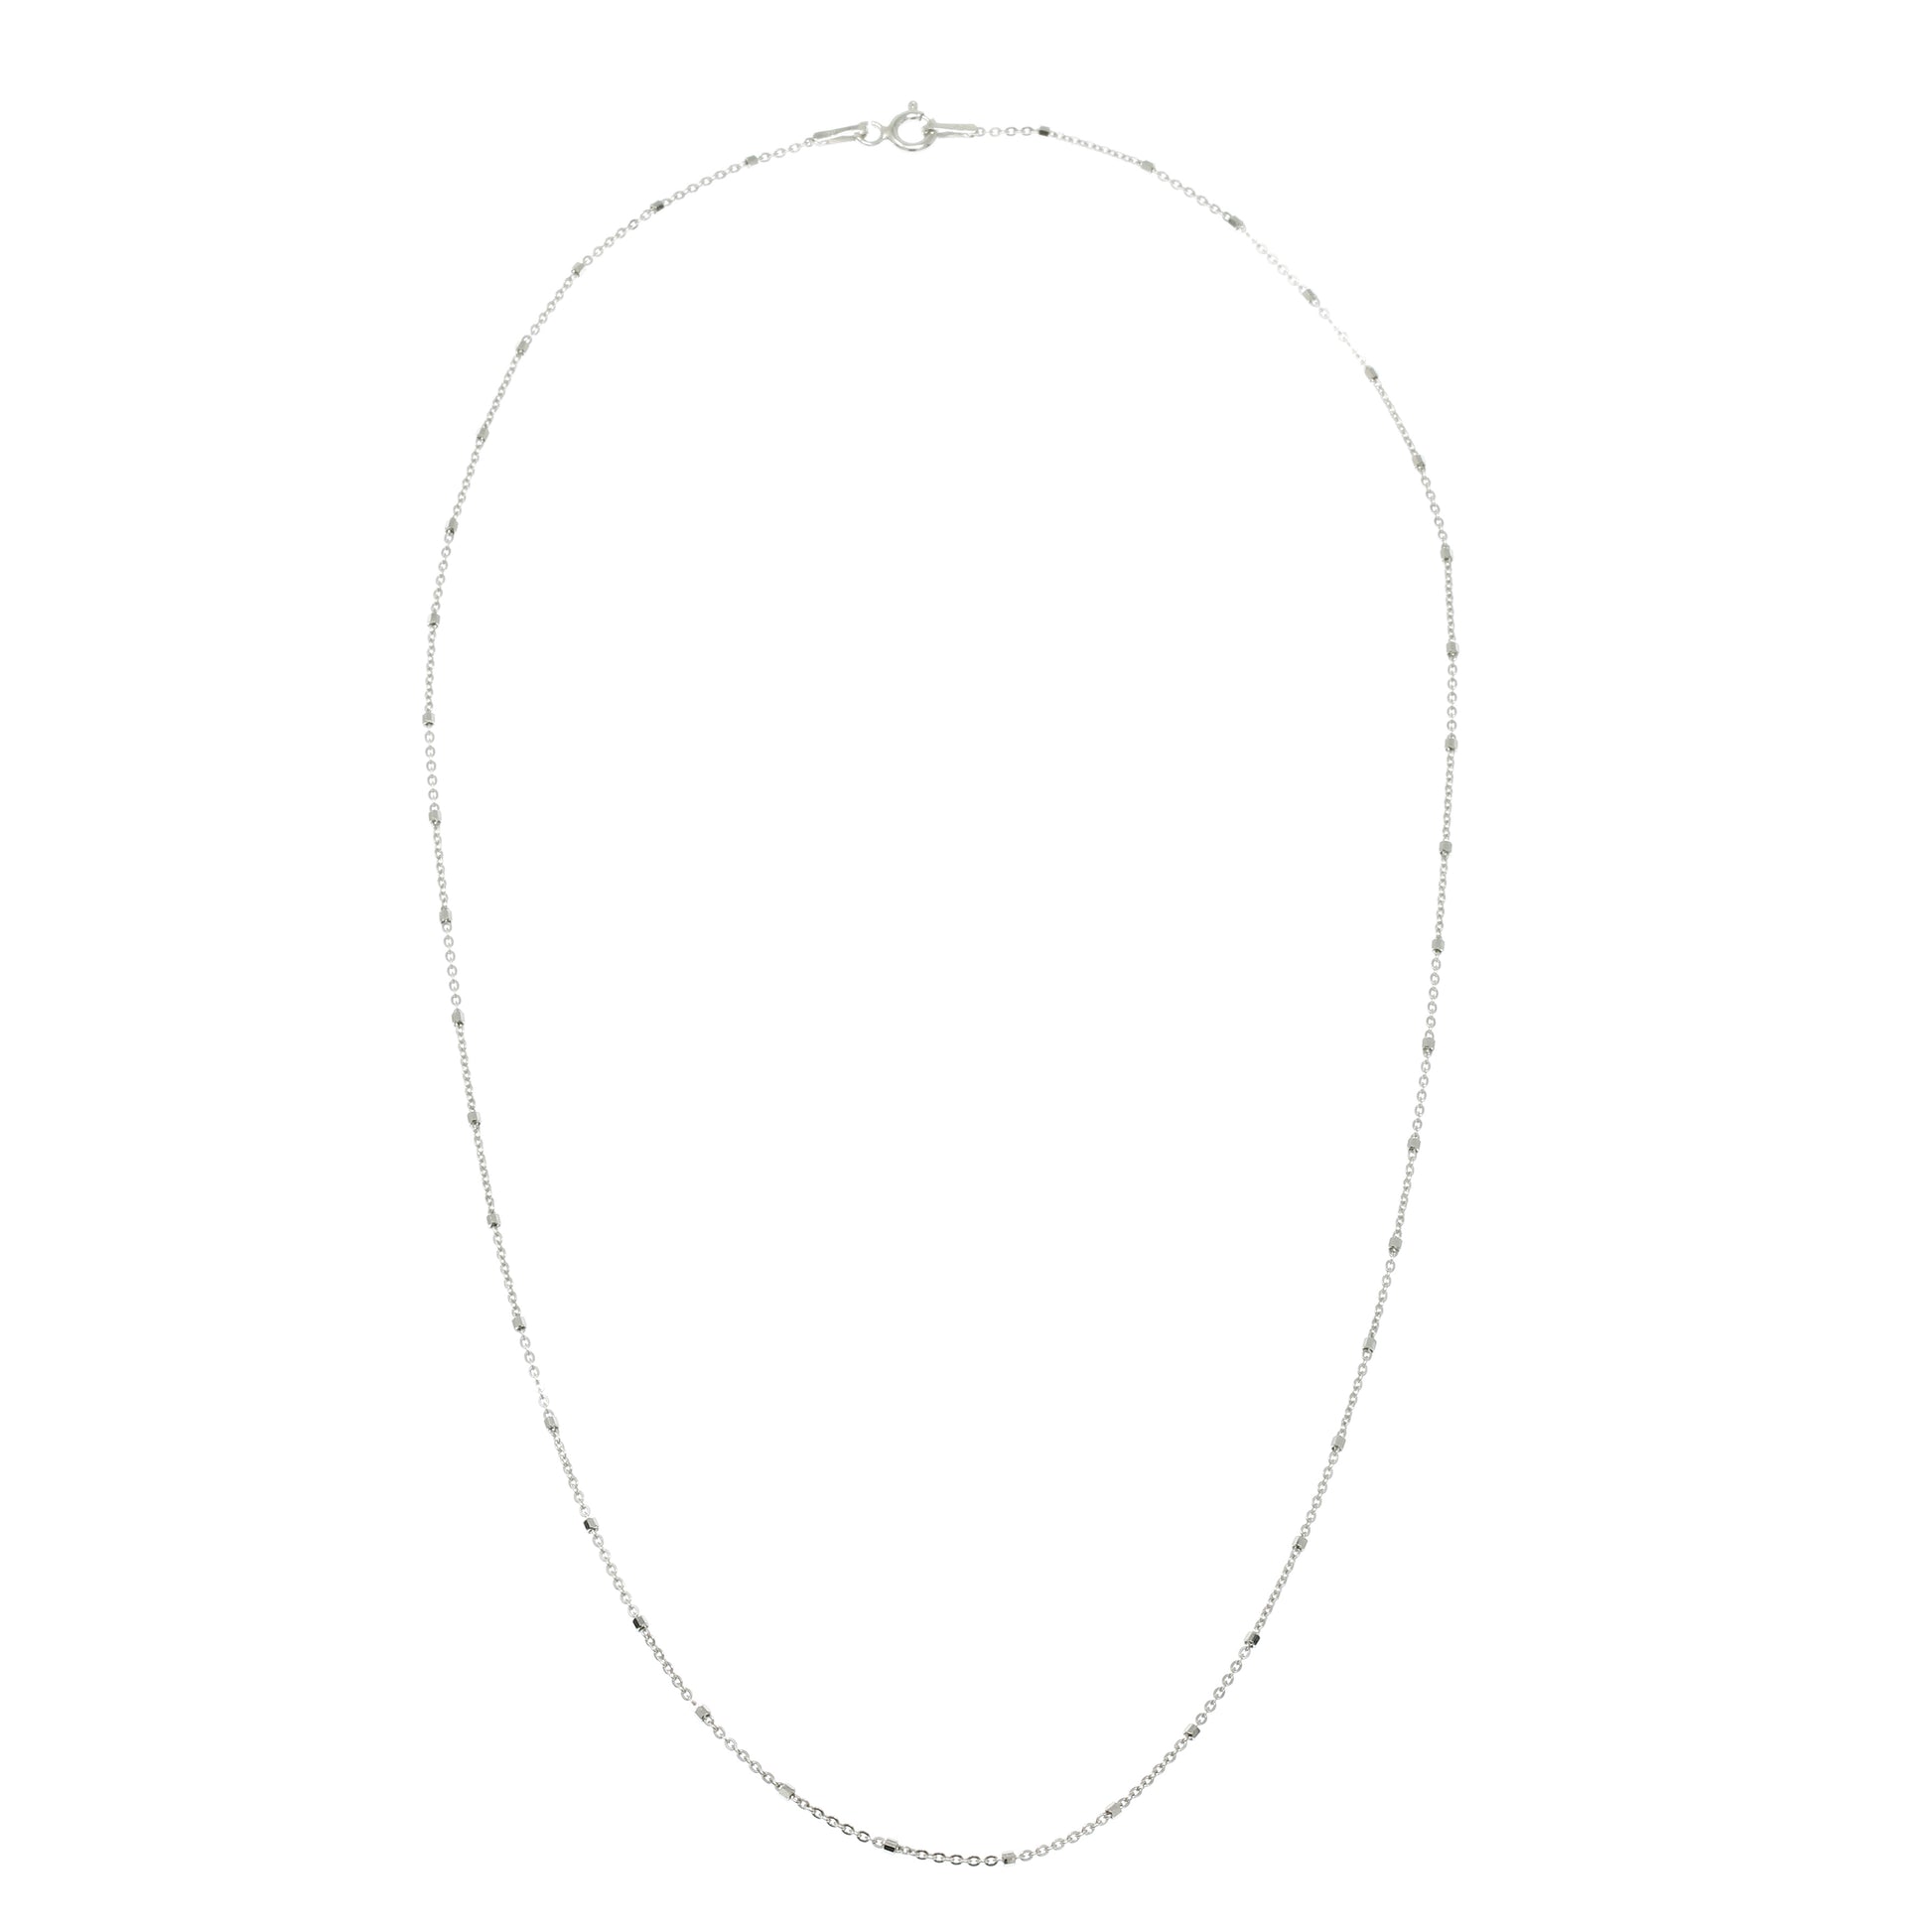 
Sterling silver decorative chain necklace with bobbles, 45 cm in length

